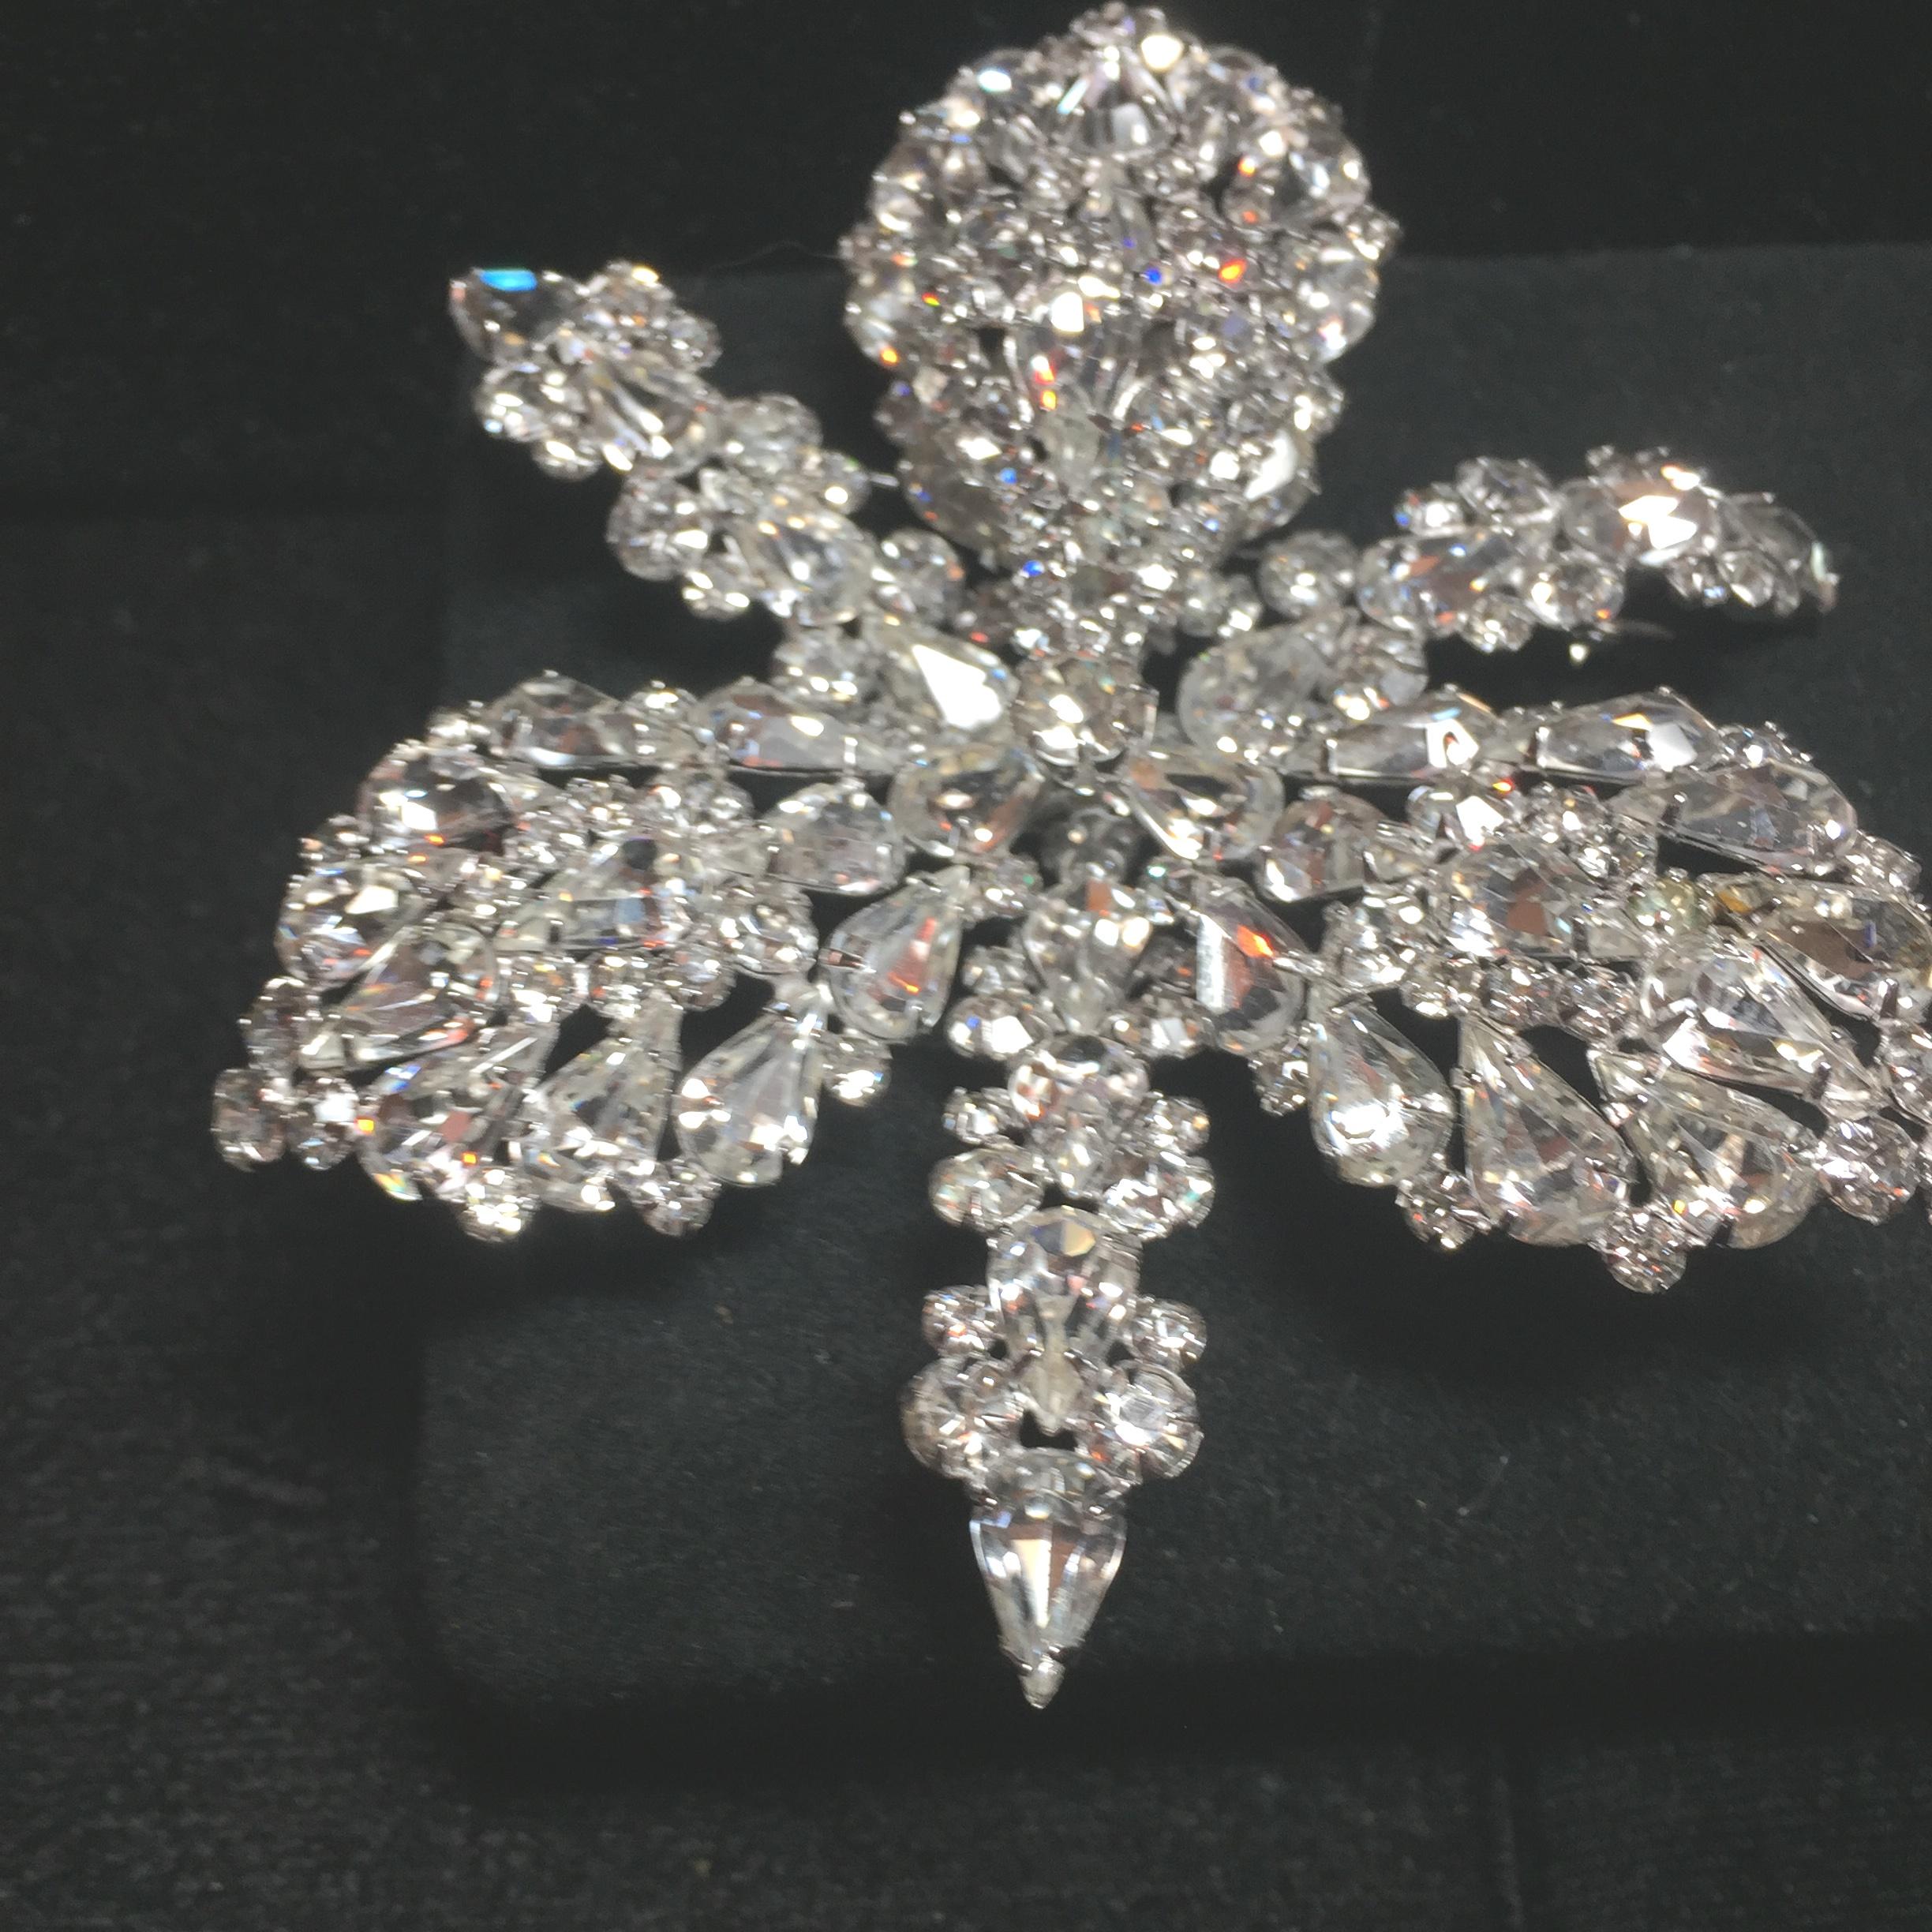 Massive Elsa Schiaparelli Crystal & Rhodium Orchid Brooch & Earrings, 1950s In Excellent Condition For Sale In Burbank, CA